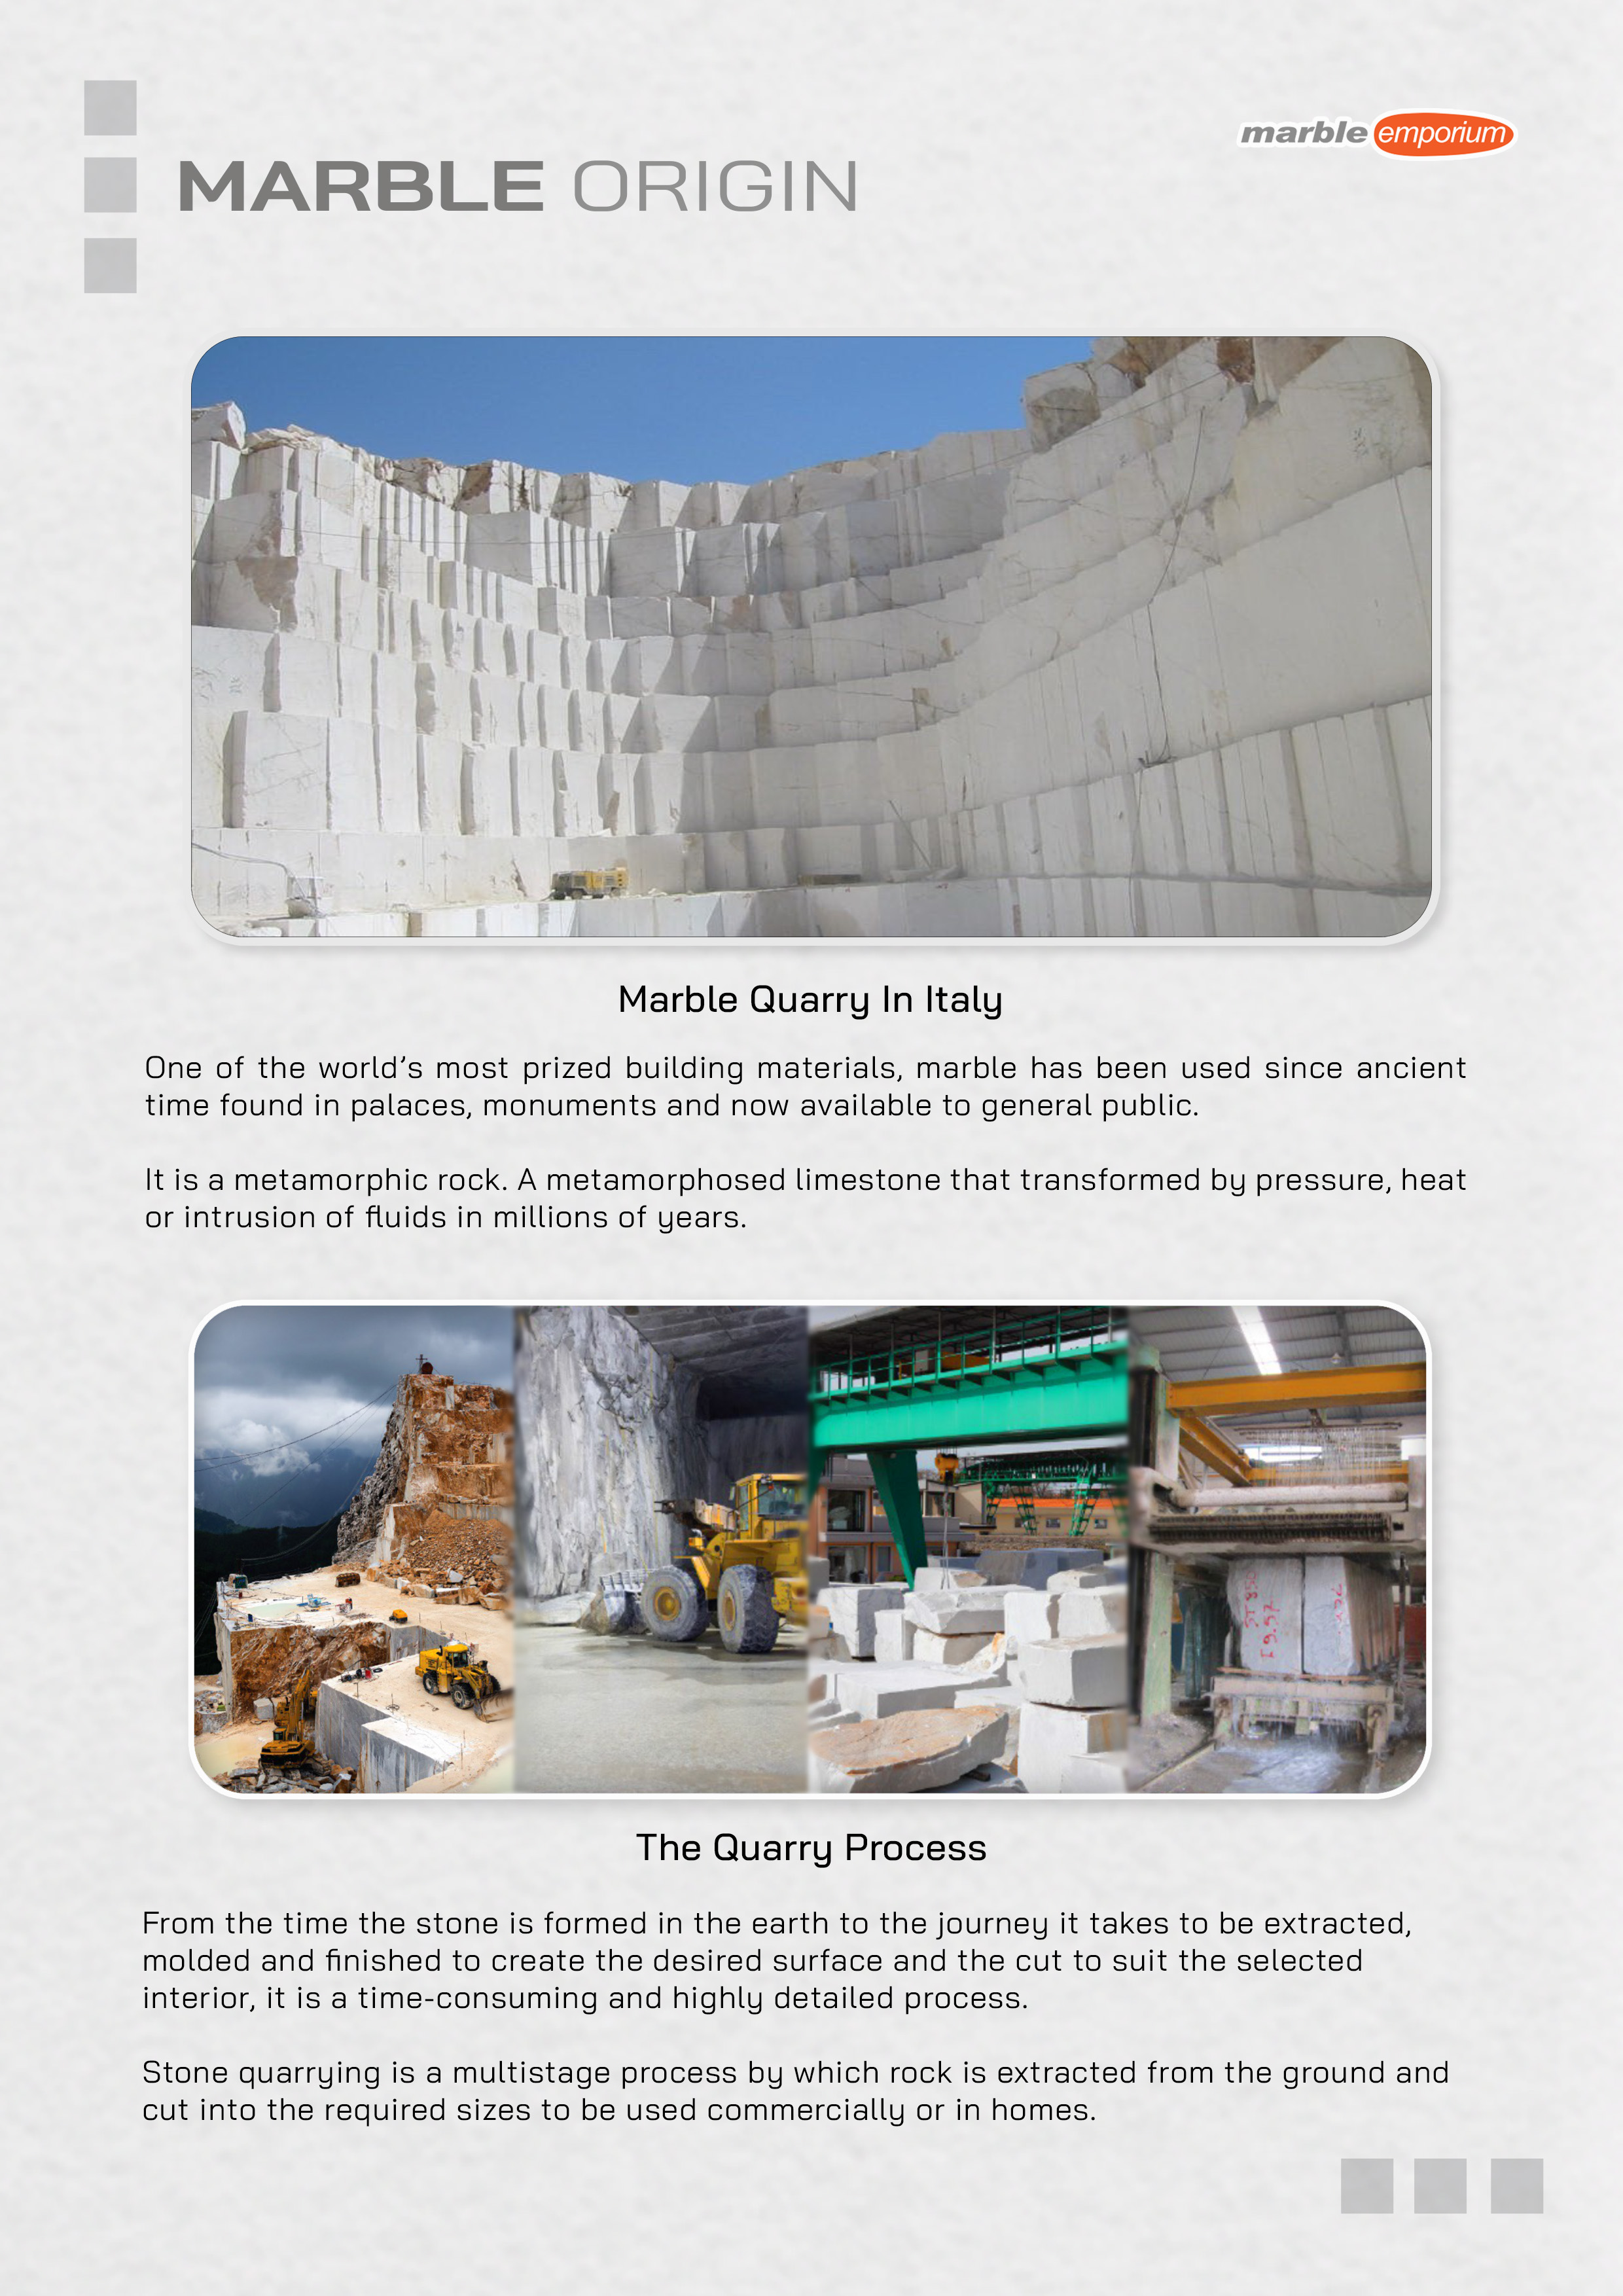 Marble Emporium | How we work page 04 - Marble Origin - One of the world’s most prized building materials, marble has been used since ancient time found in palaces and monuments now available to general public. It is a metamorphic rock. A metamorphosed limestone that transformed by pressure, heat or intrusion of fluids in millions of years. From the time the stone is formed in the earth to the journey it takes to be extracted, molded and finished to create the desired surface and the cut to suit the selected interior, it is a time-consuming and highly detailed process. Stone quarrying is a multistage process by which rock is extracted from the ground and cut into the required sizes to be used commercially or in homes.